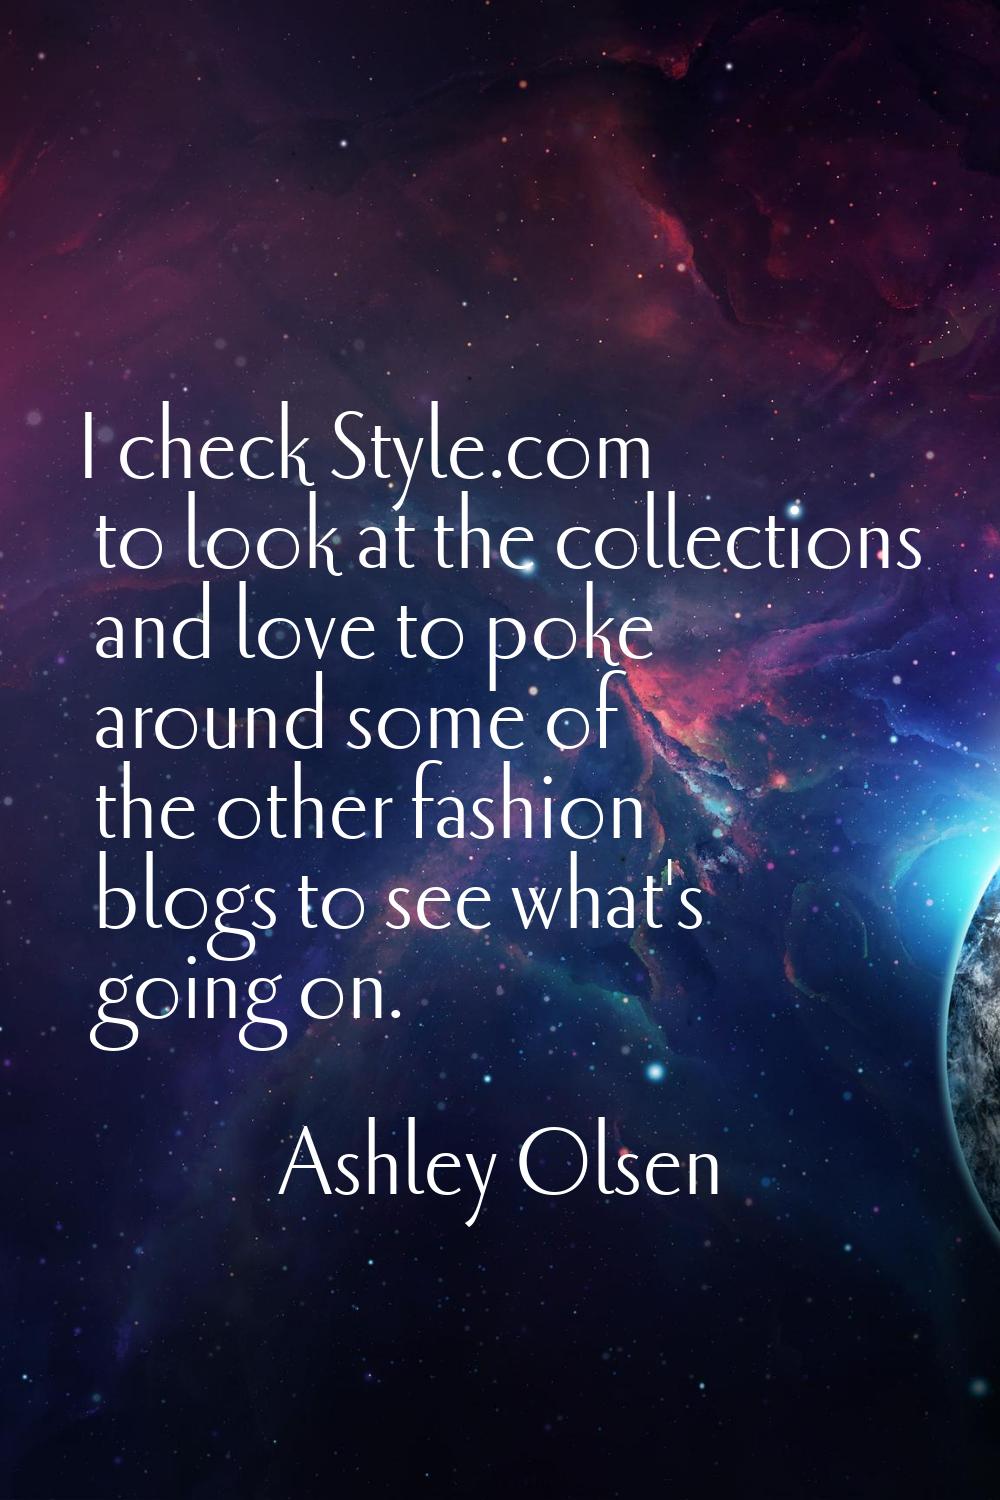 I check Style.com to look at the collections and love to poke around some of the other fashion blog